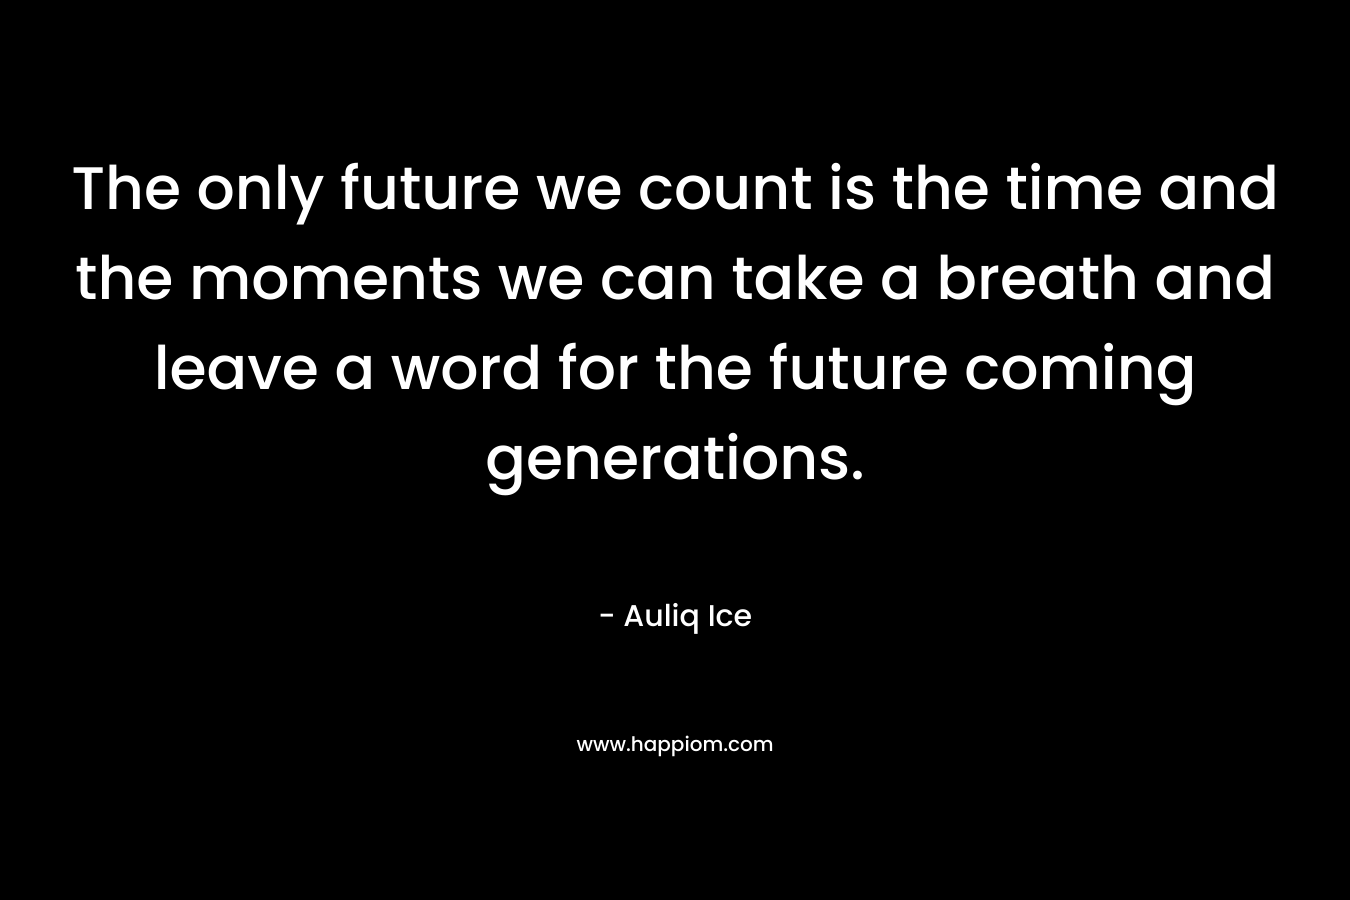 The only future we count is the time and the moments we can take a breath and leave a word for the future coming generations.